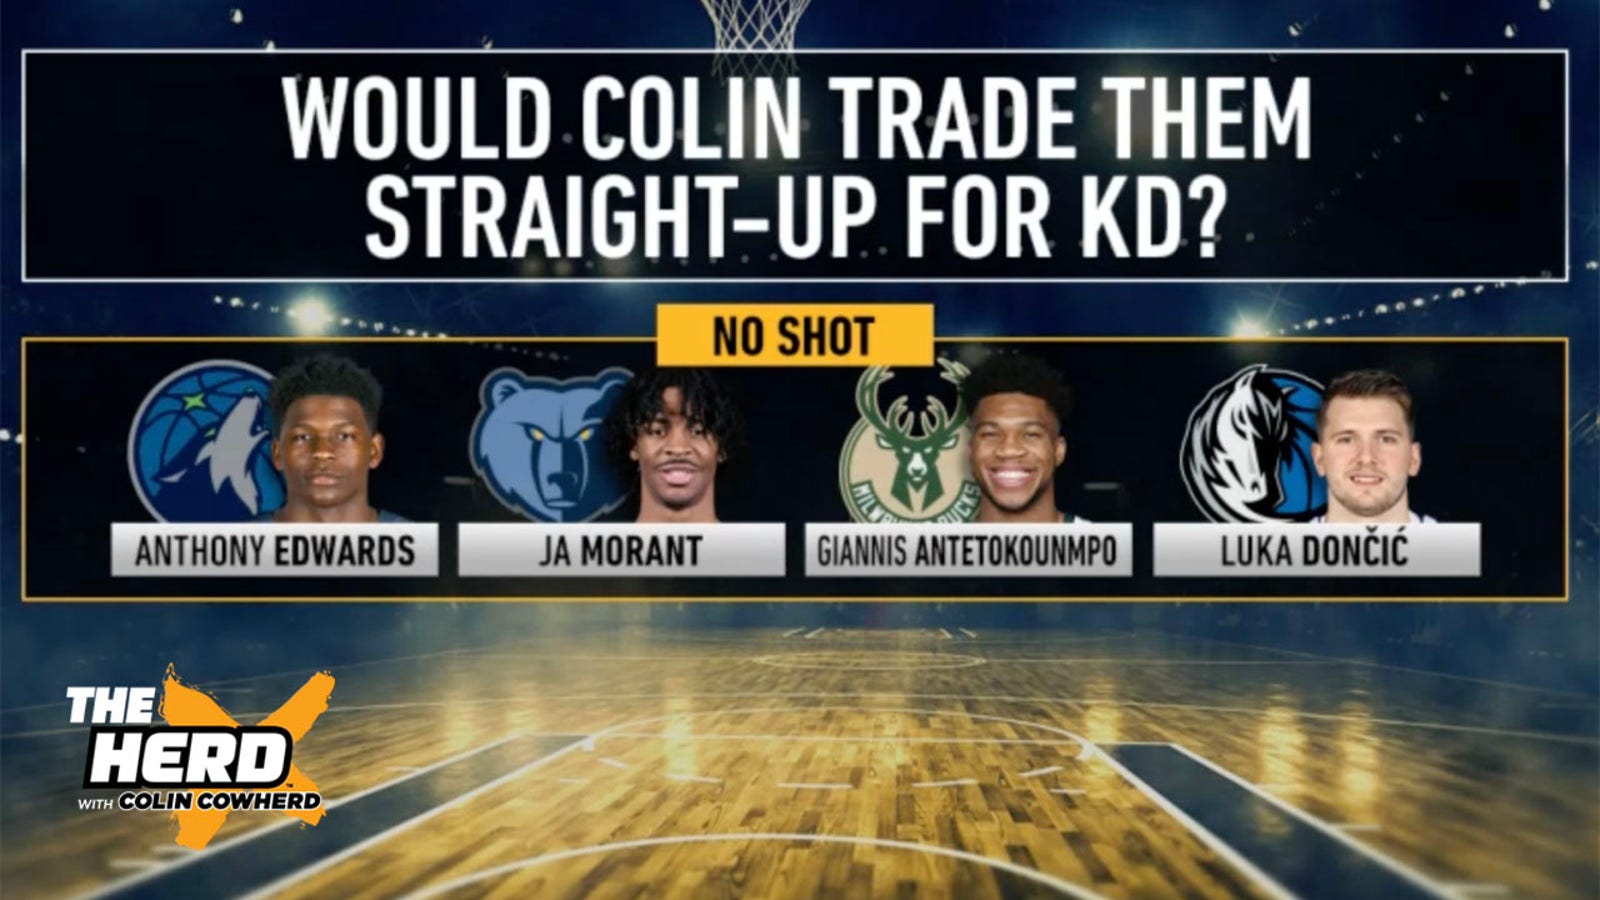 Who would you not trade for KD?